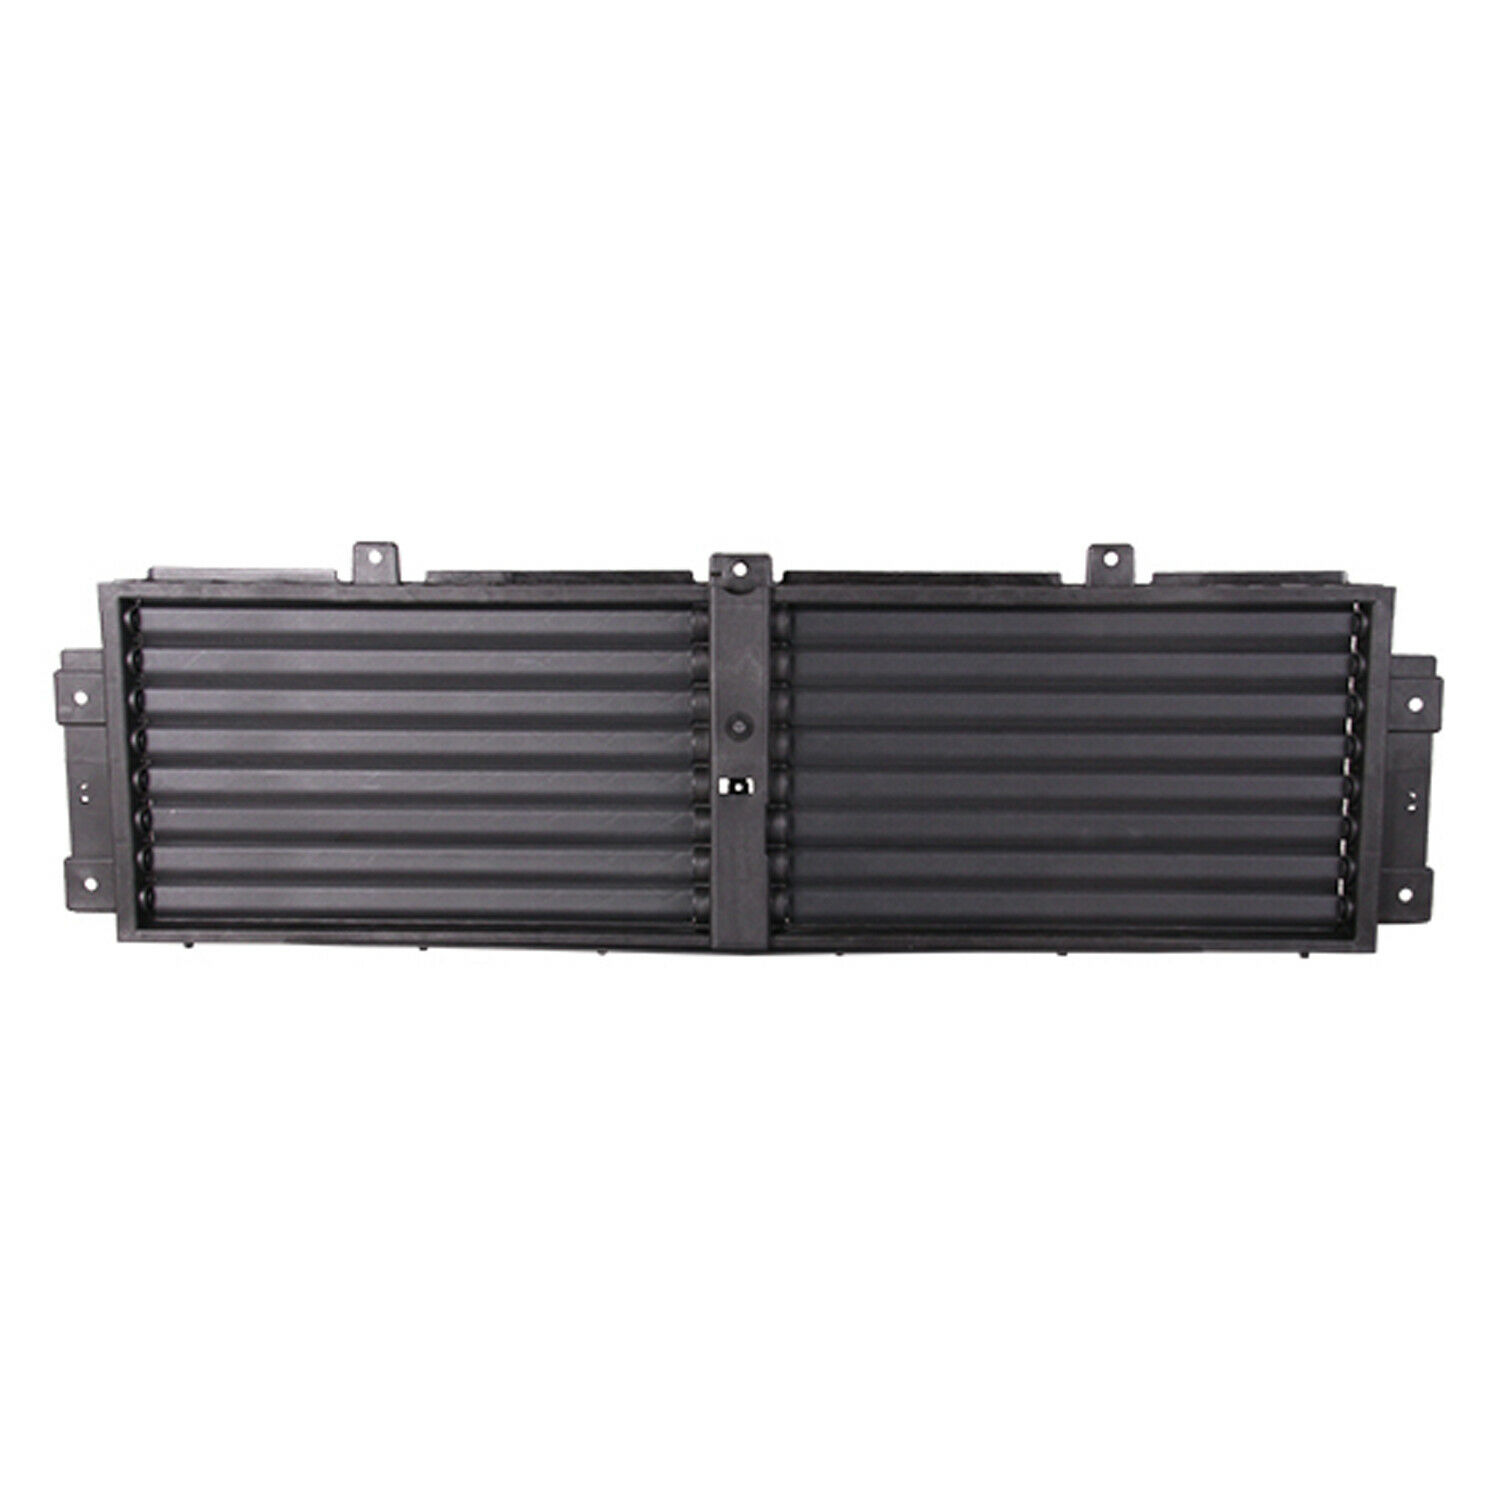 Aftermarket GRILLES for CHEVROLET - TRAVERSE, TRAVERSE,18-19,Grille air intake assy